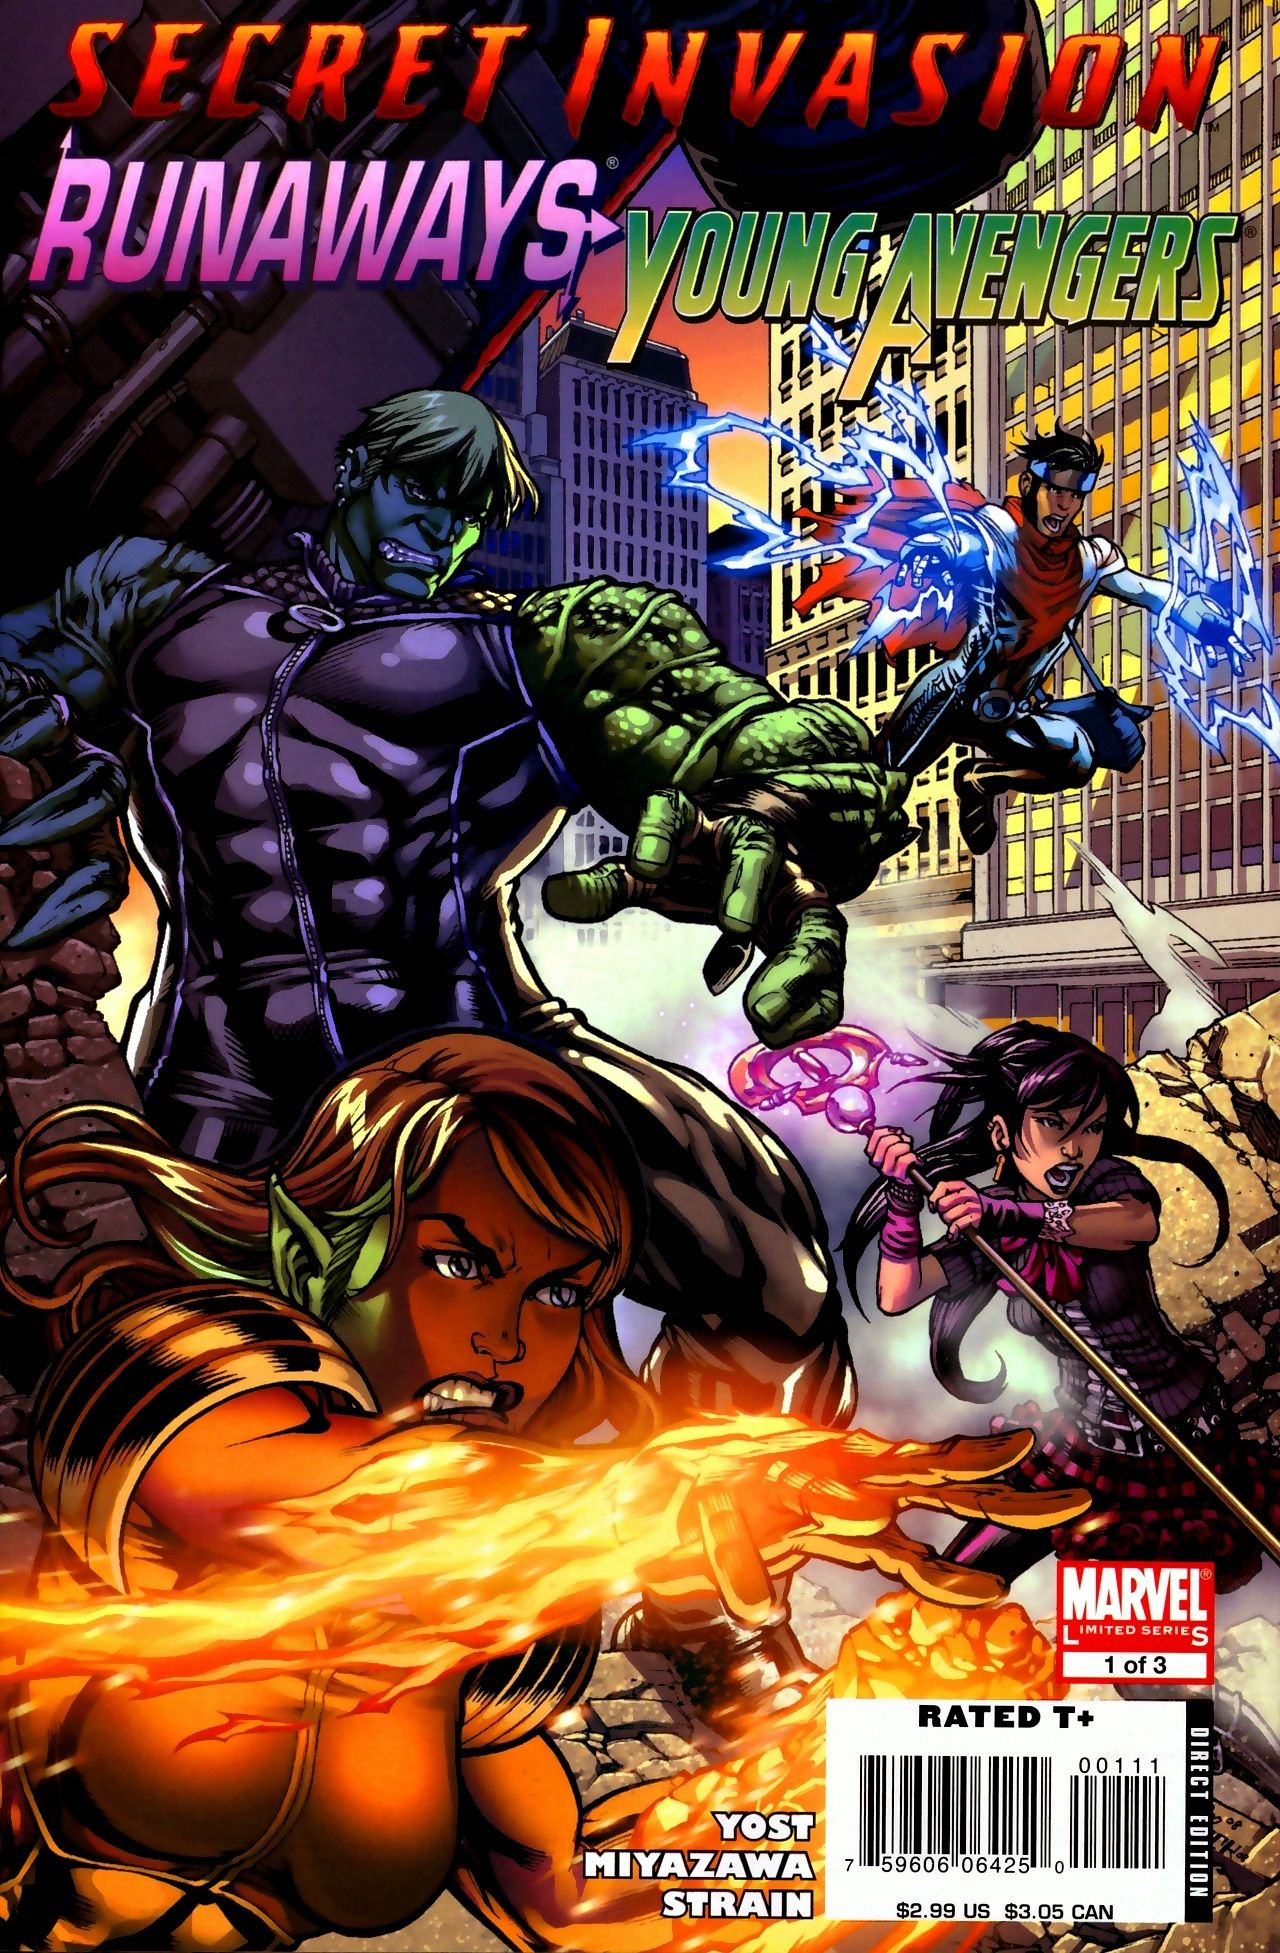 Read online Secret Invasion: Runaways/Young Avengers comic -  Issue #1 - 1